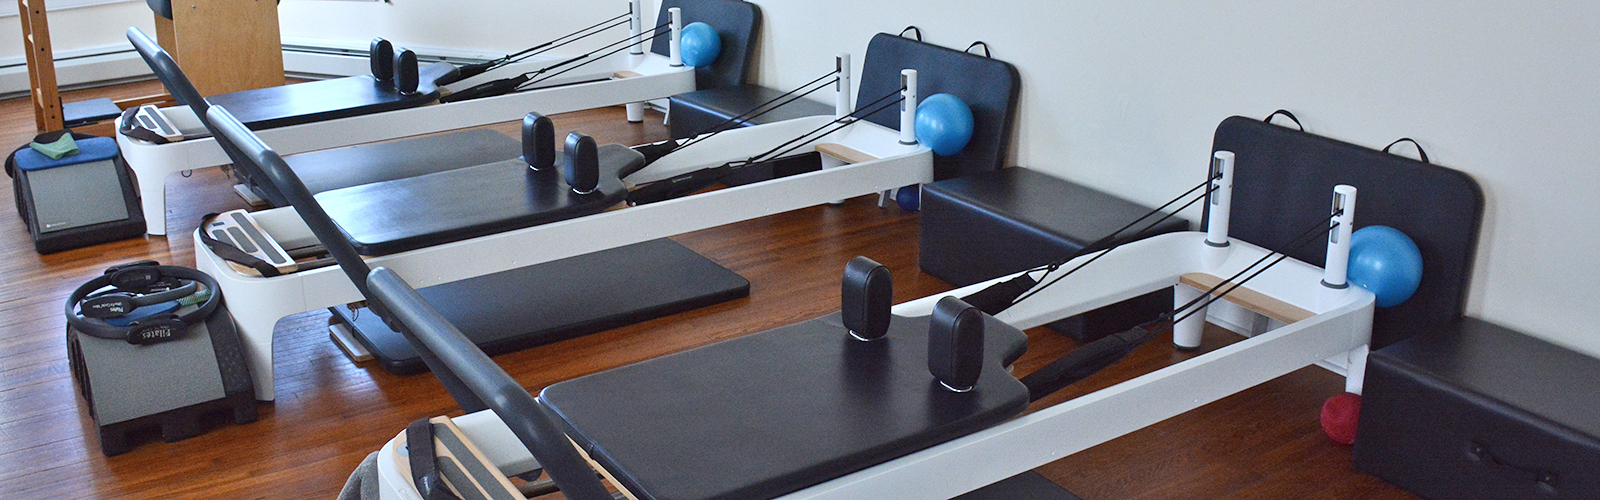 Pilates Art Studio features small class sizes and one-on-one Pilates training.